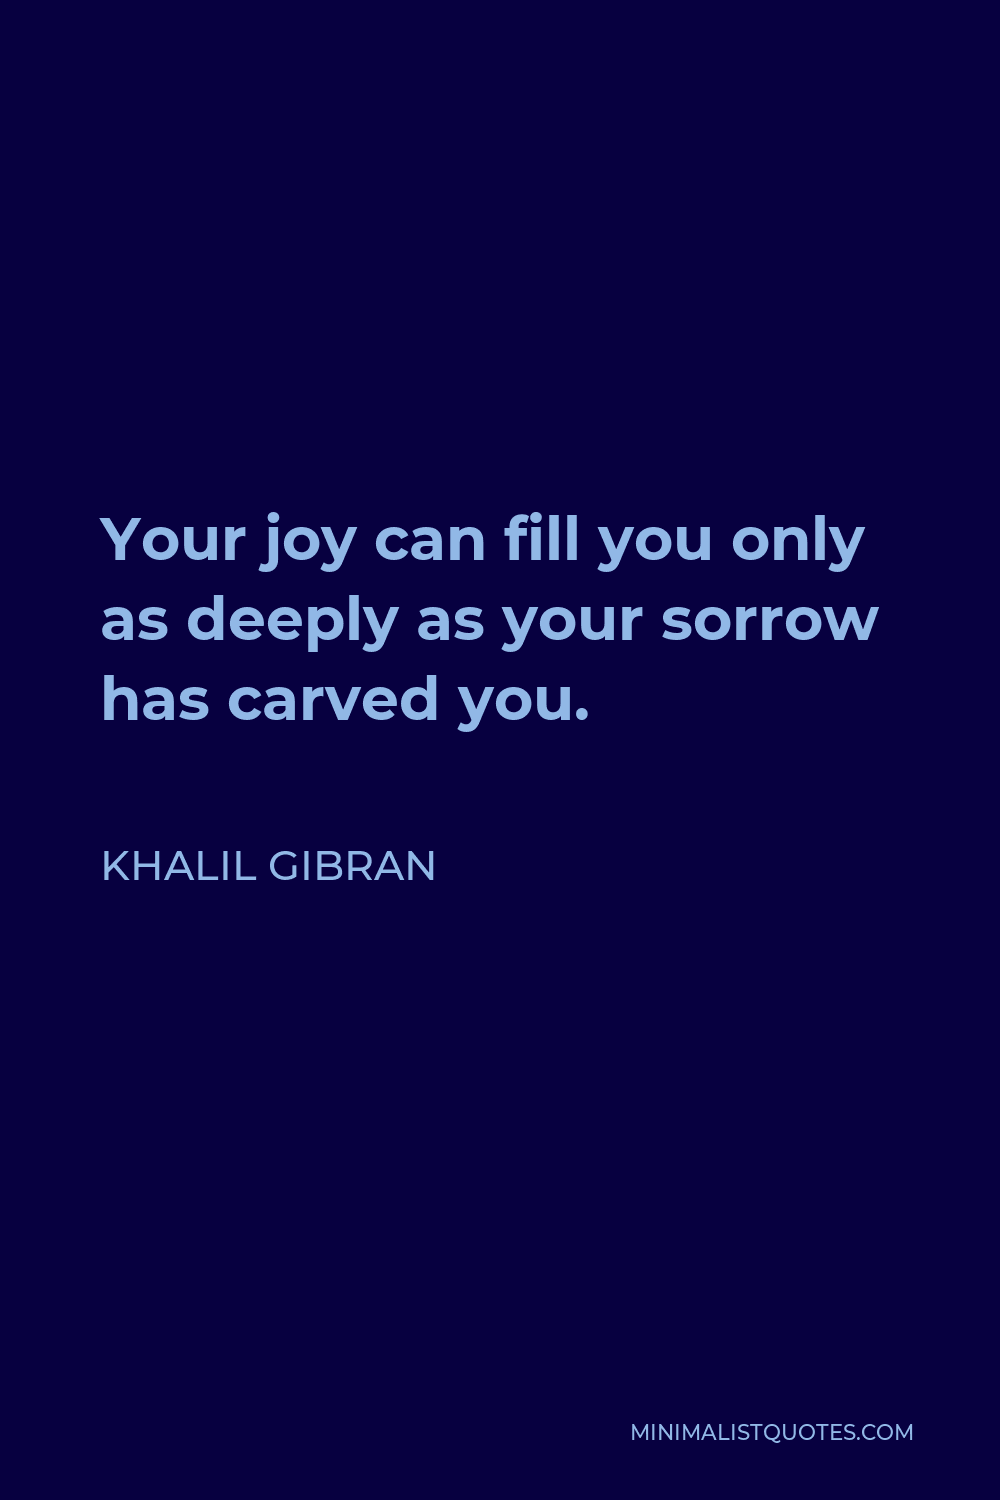 Khalil Gibran Quote - Your joy can fill you only as deeply as your sorrow has carved you.